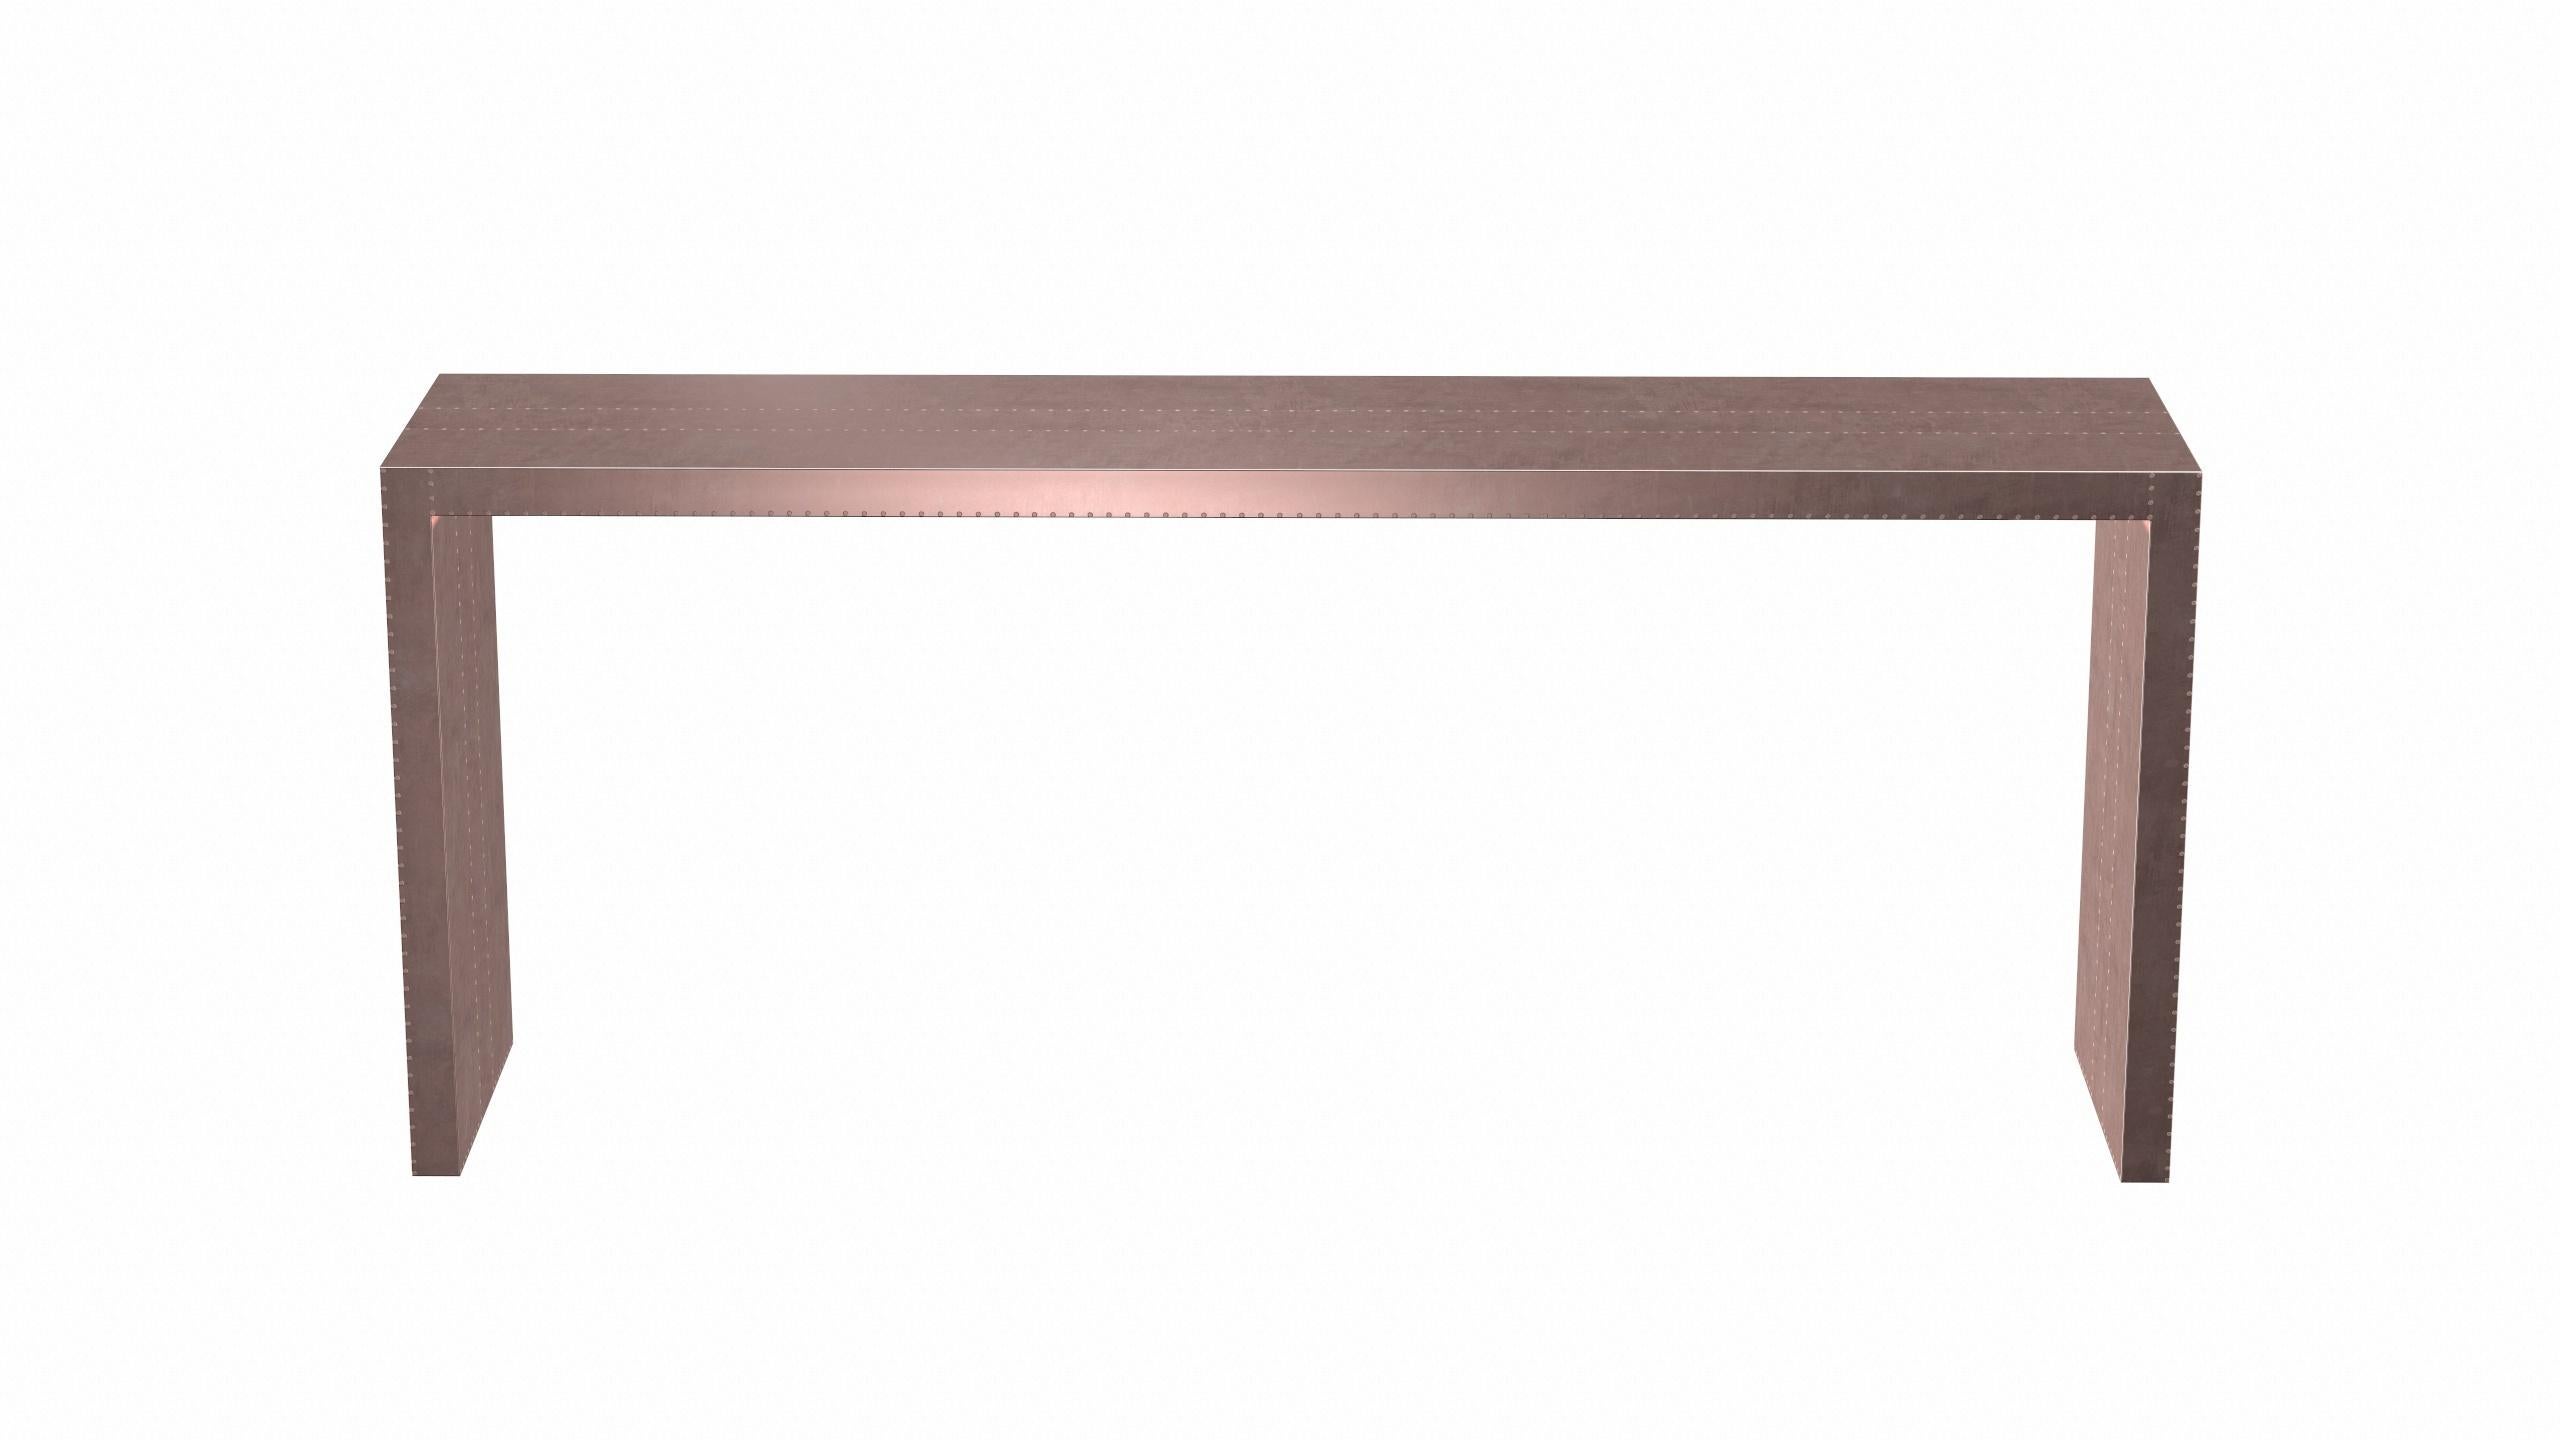 Hand-Carved Art Deco Rectangular Console Tables Fine Hammered Copper by Alison Spear For Sale